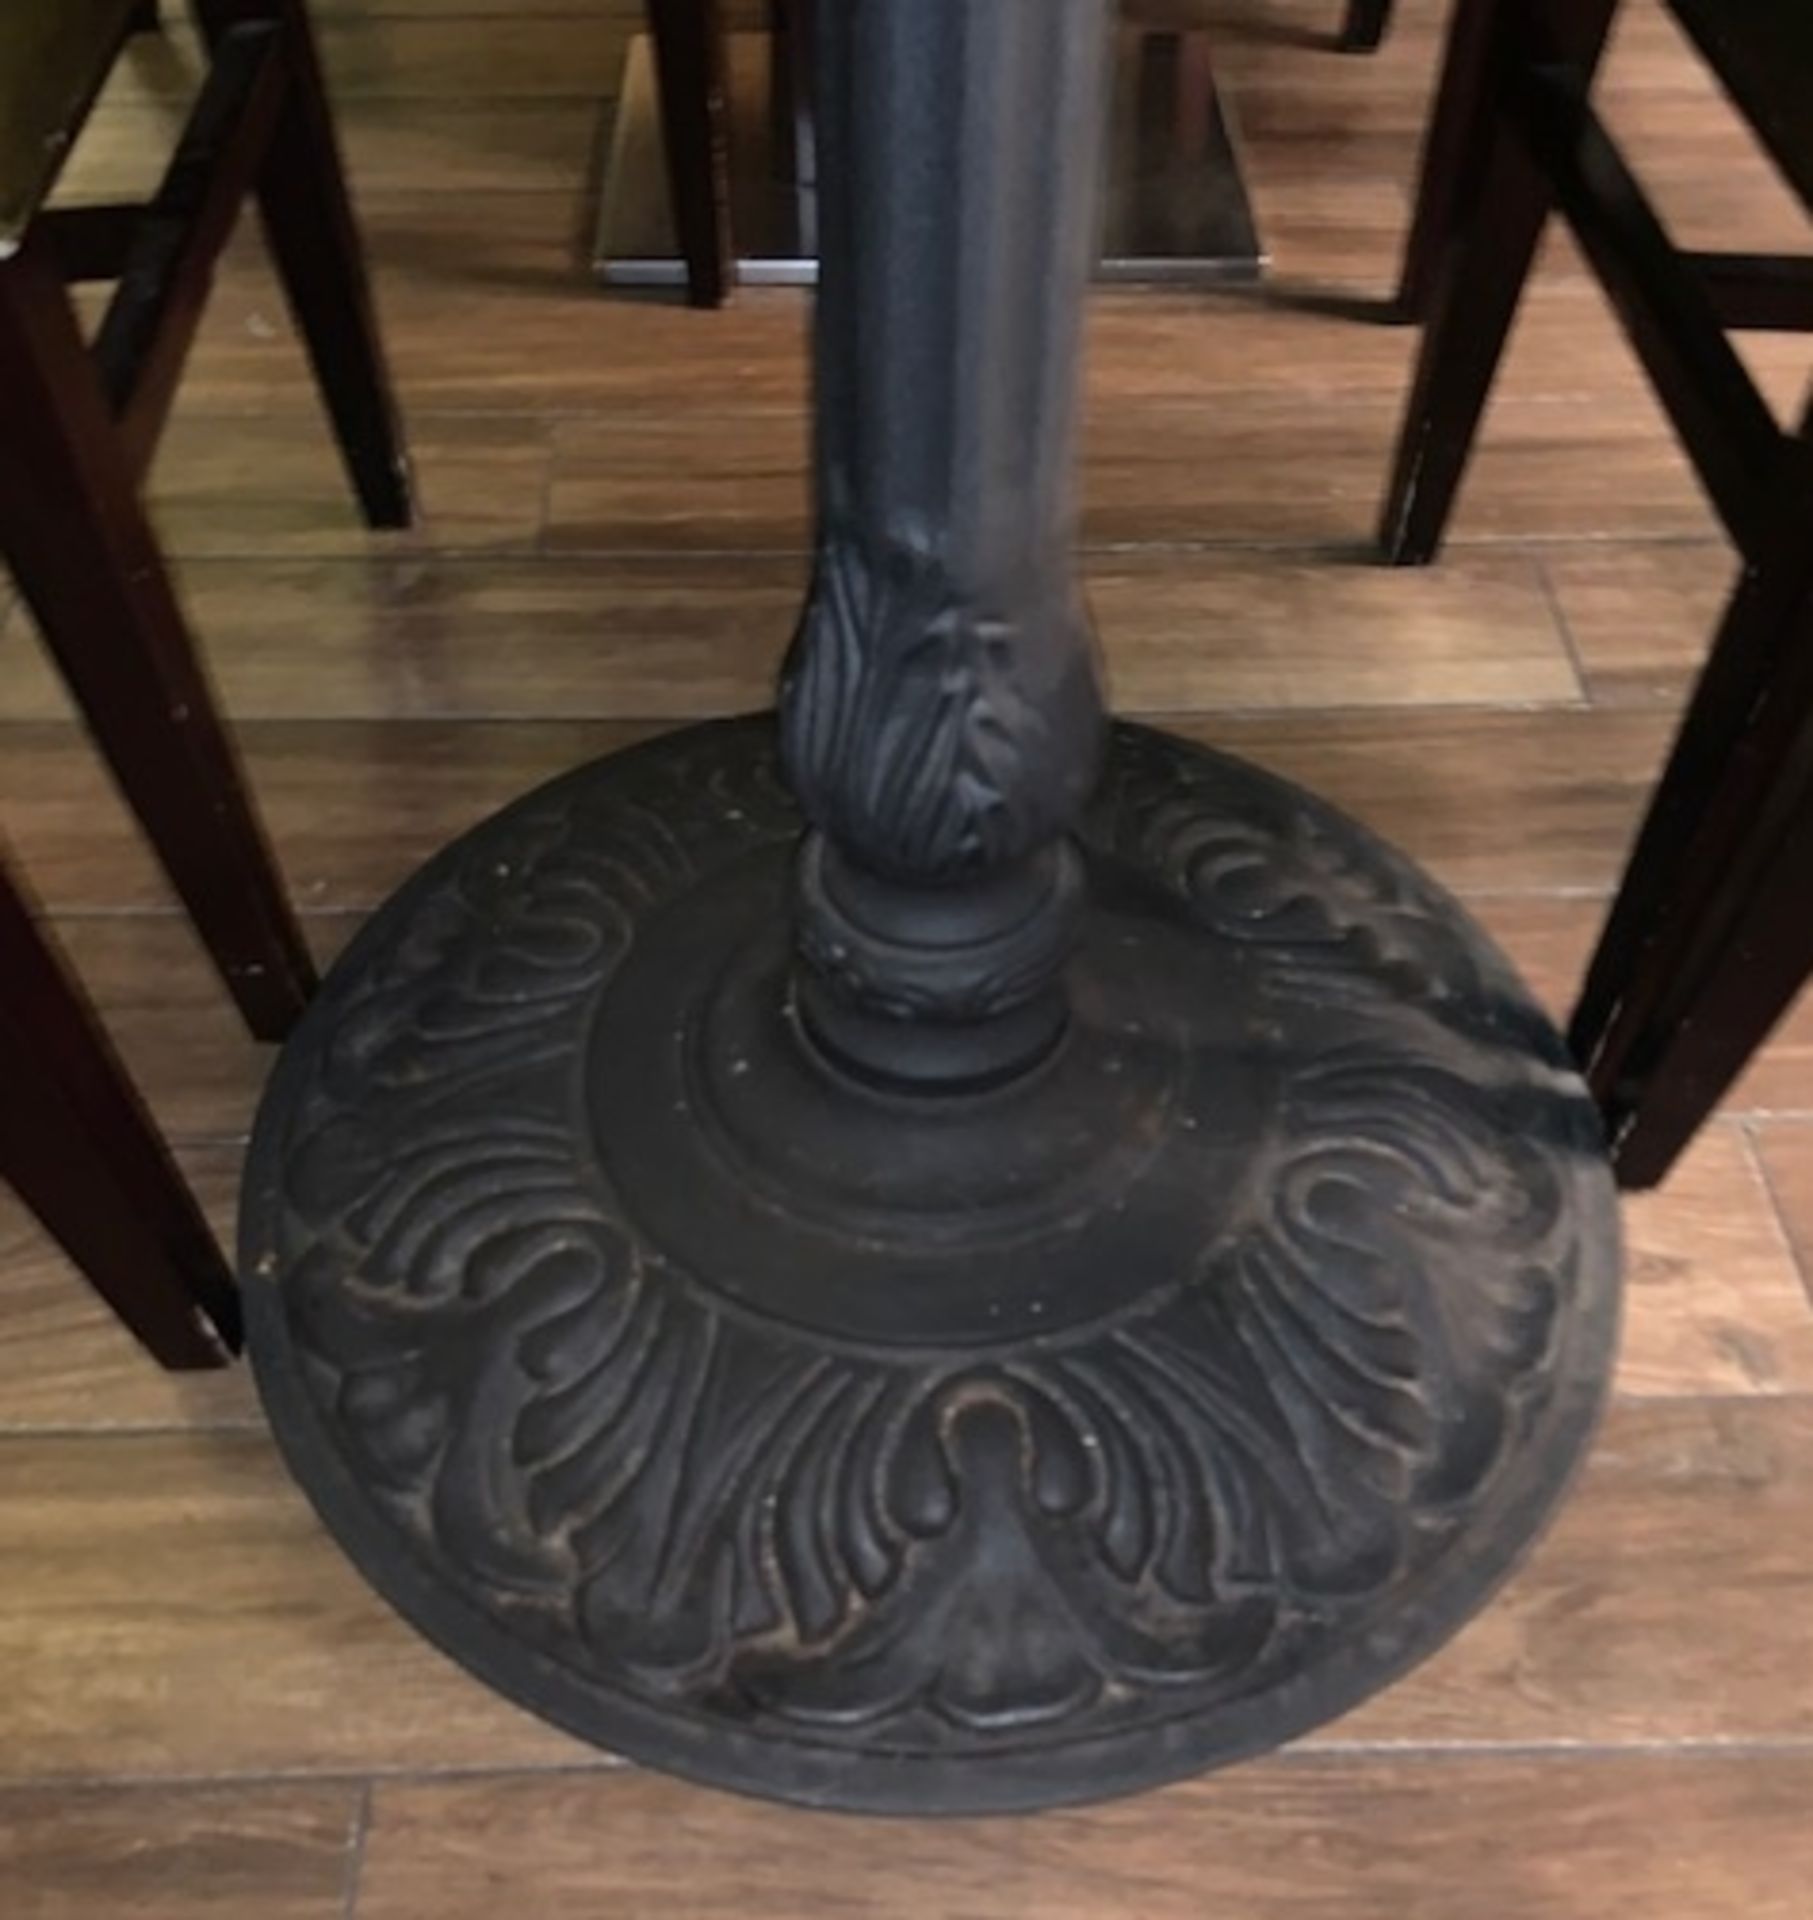 30" x 30" Wood Top Table with Cast Iron Base, 1st Floor Hive Lounge - Image 2 of 2